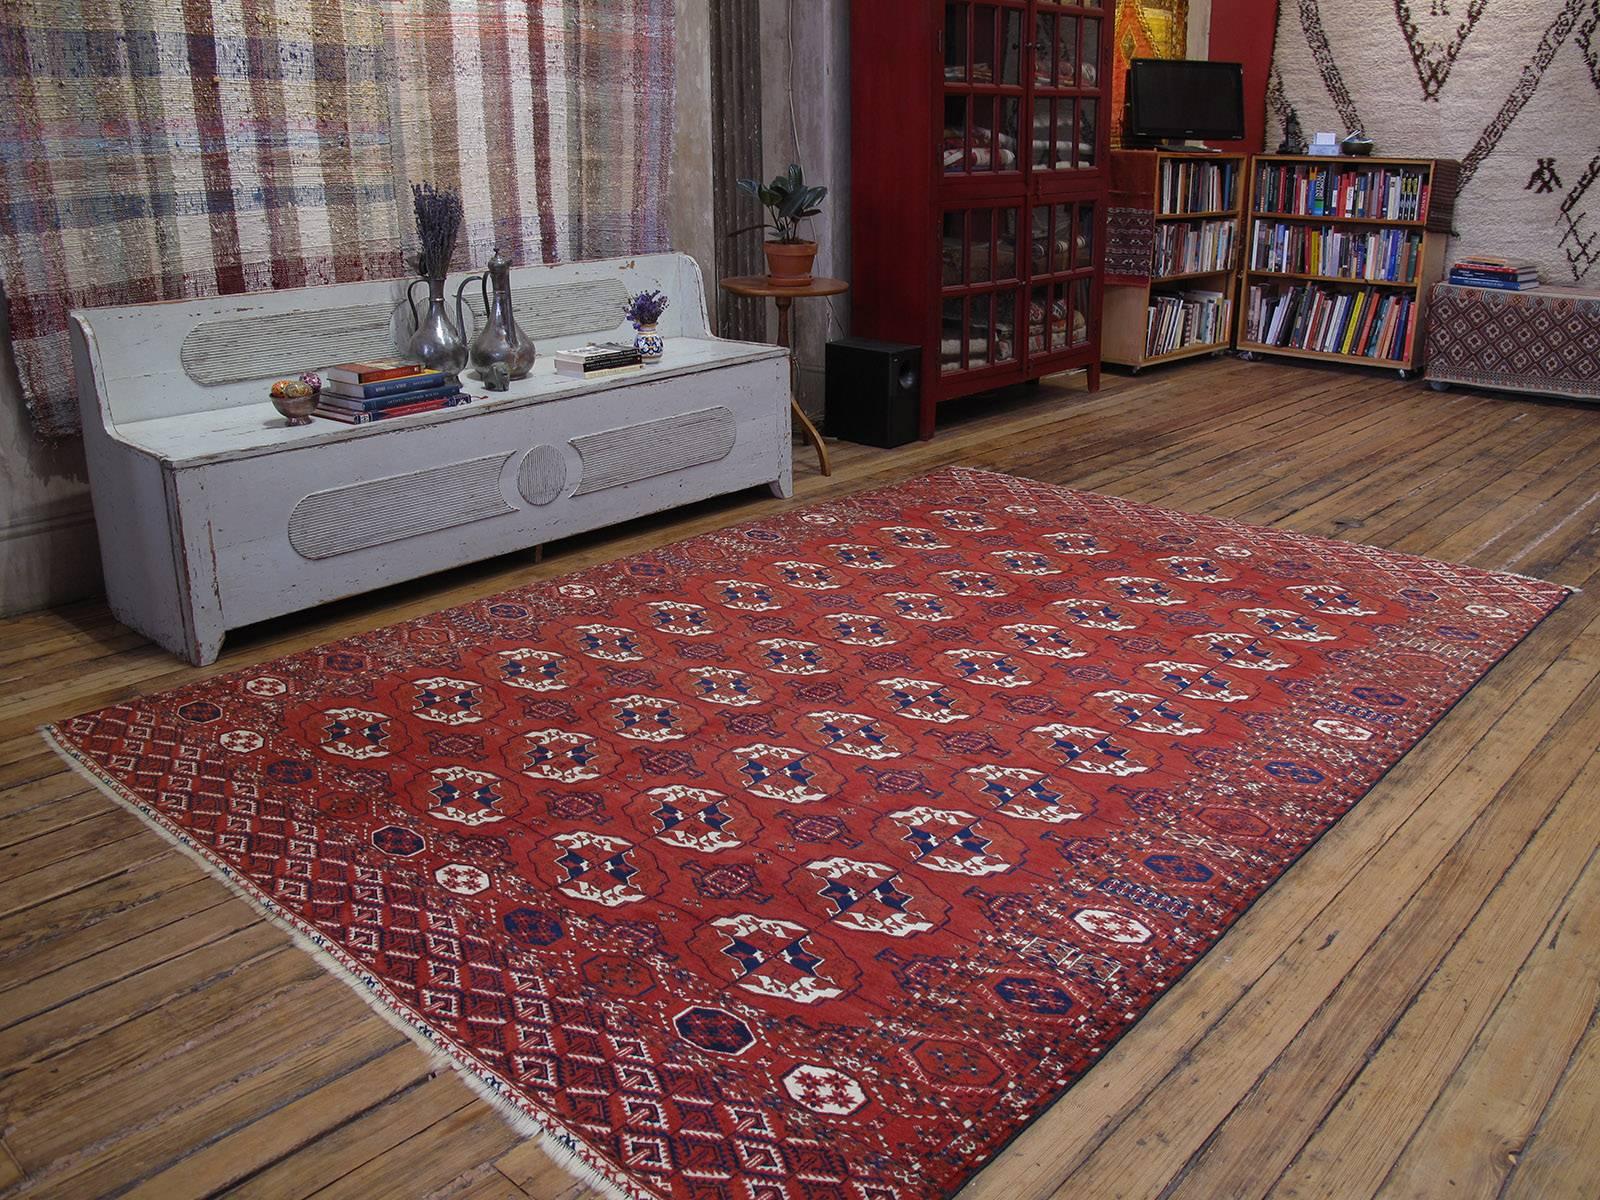 Antique Turkmen main carpet or rug. A great example of Turkmen tribal weaving carpet or rug featuring the classical design of the Tekke Turkmen tribe erroneously called a 